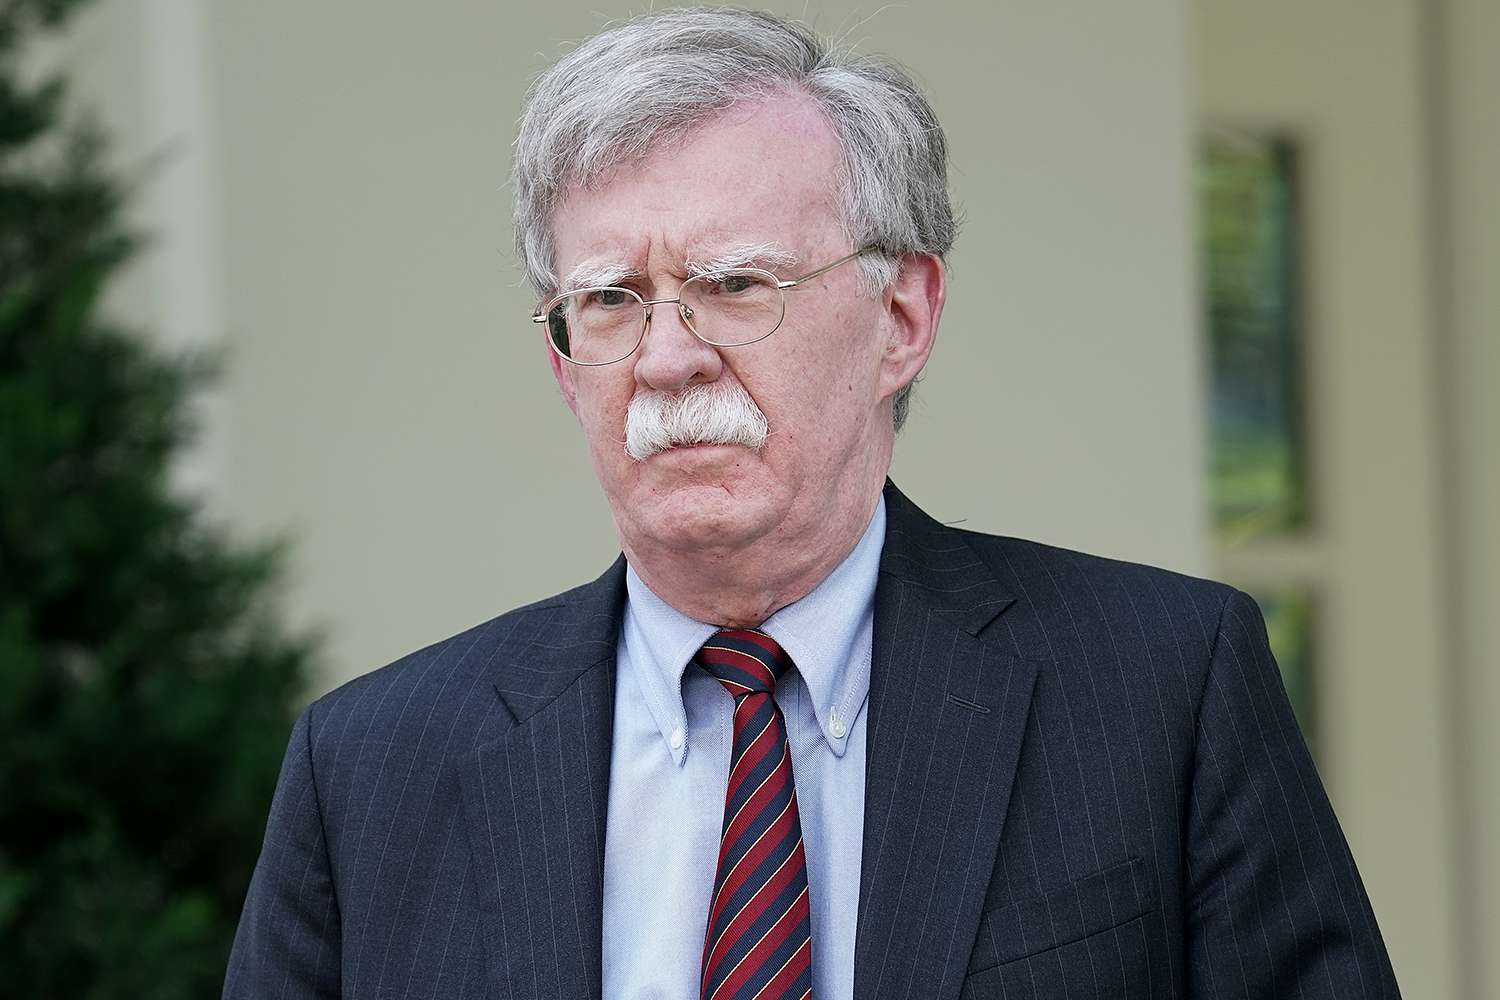 Ex-National Security Advisor John Bolton Admits He's Planned Coups, Says 'It Takes a Lot of Work'